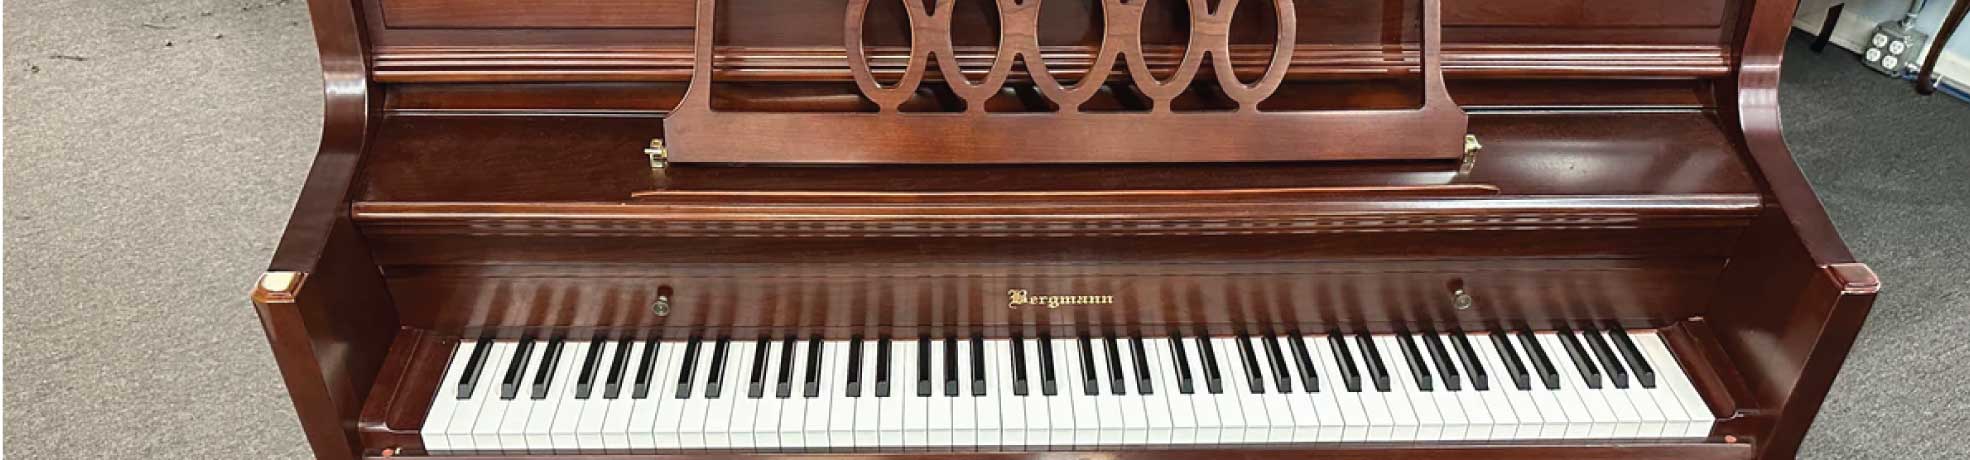 Used Upright Pianos